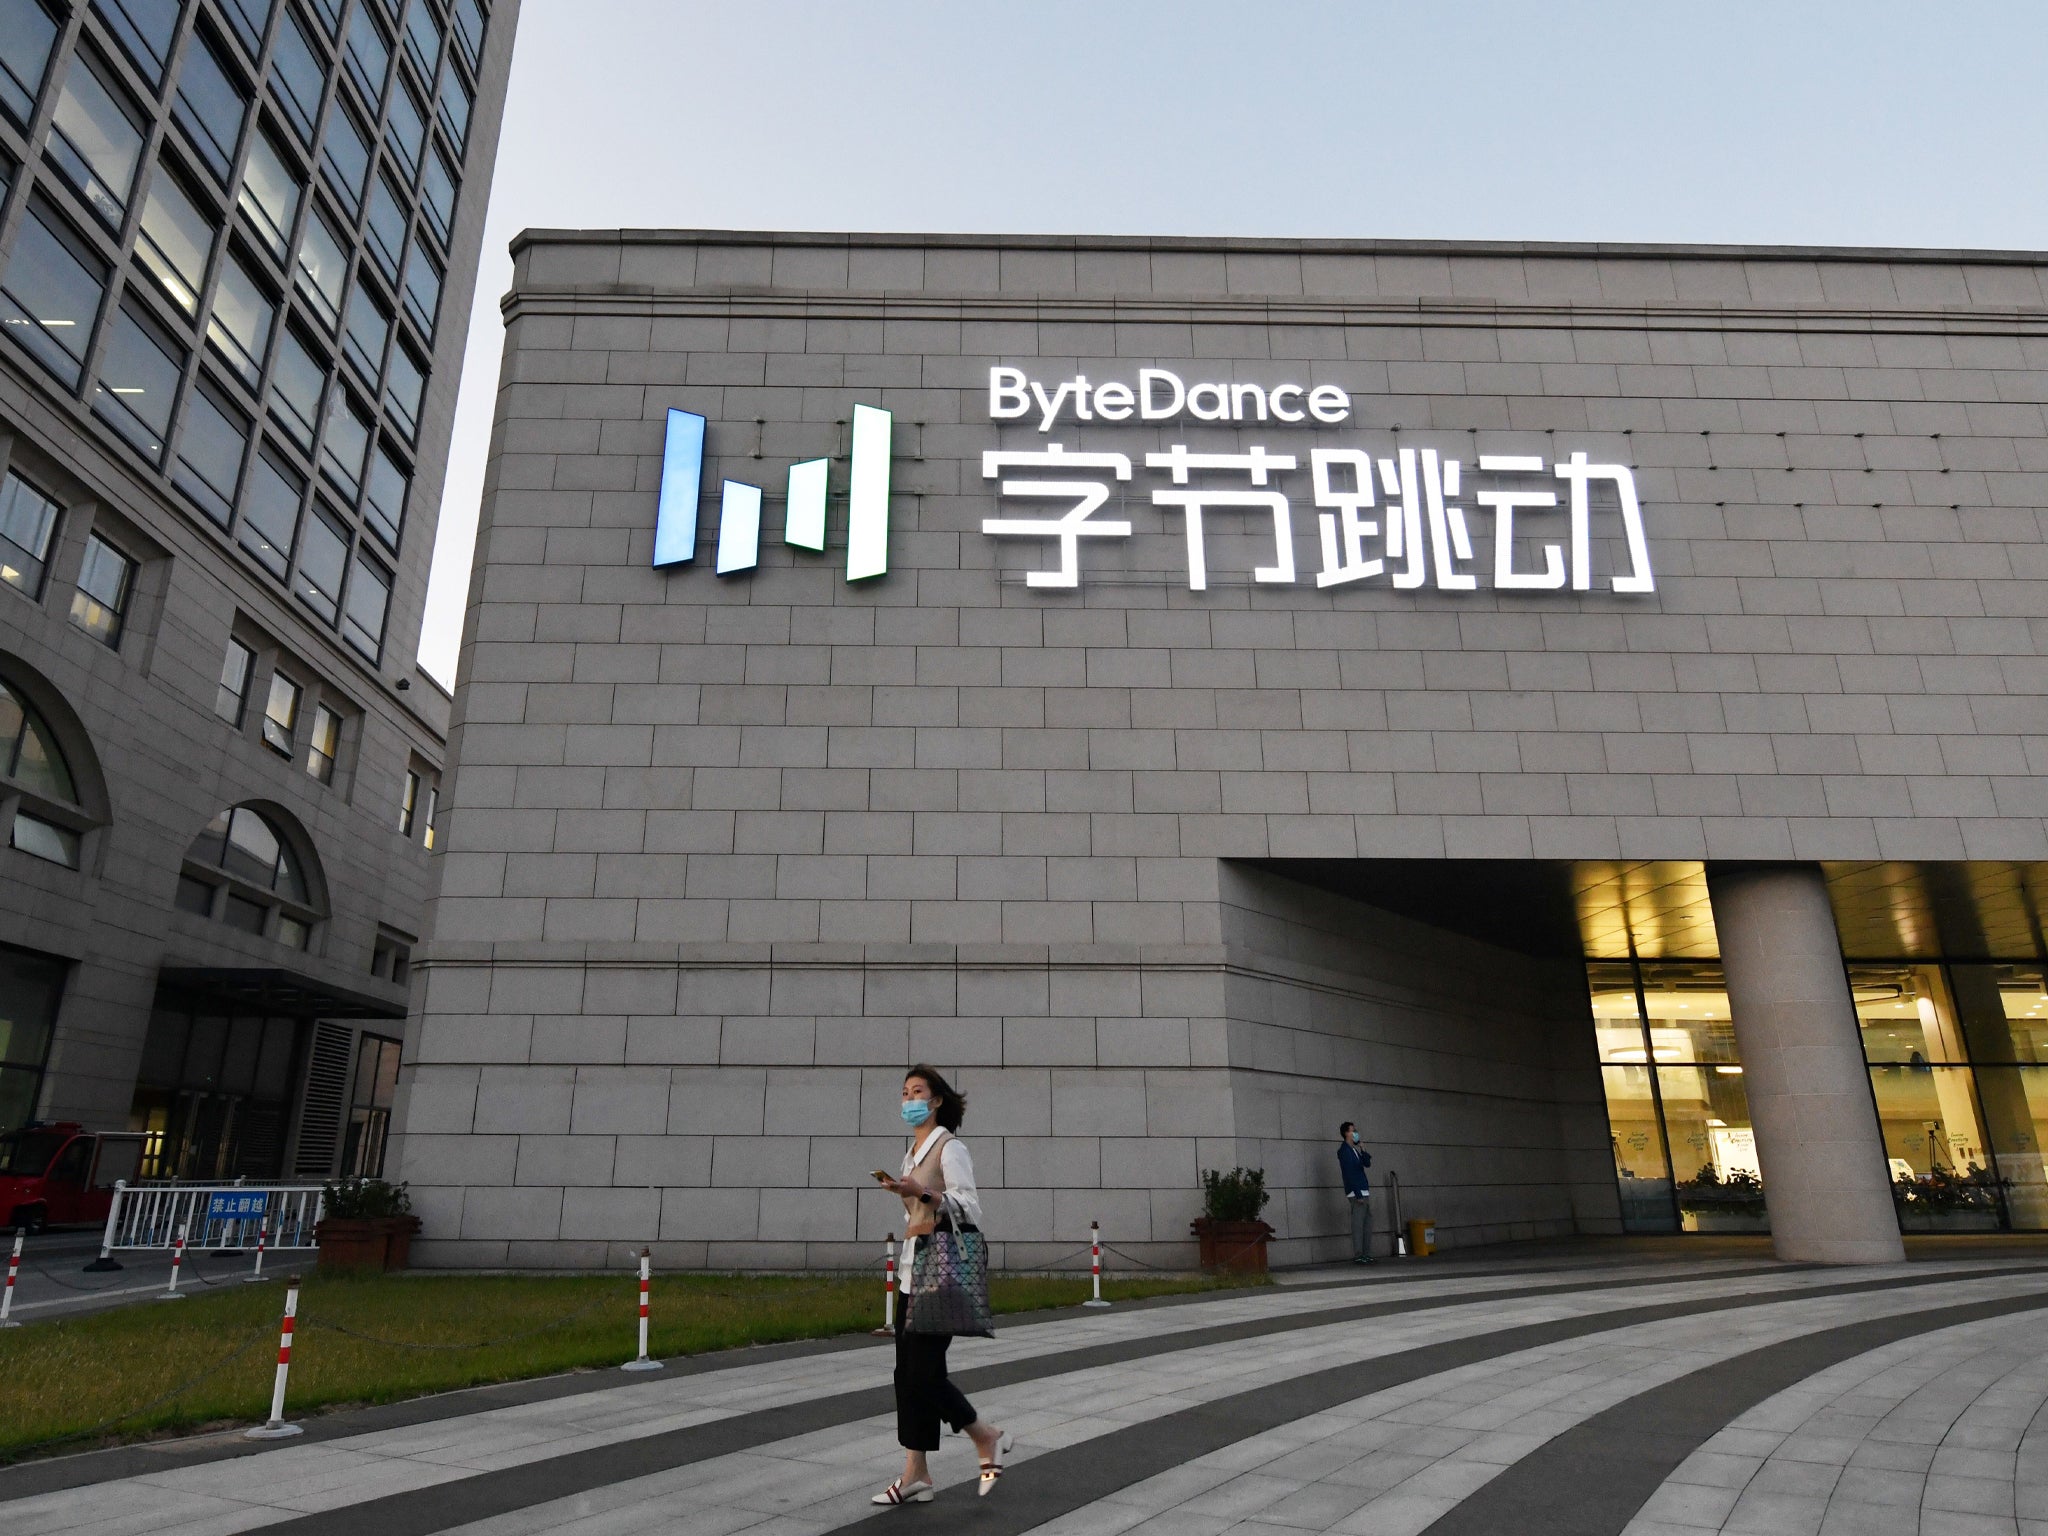 The Beijing headquarters of ByteDance, the parent company of TikTok, who launched the app in September 2016